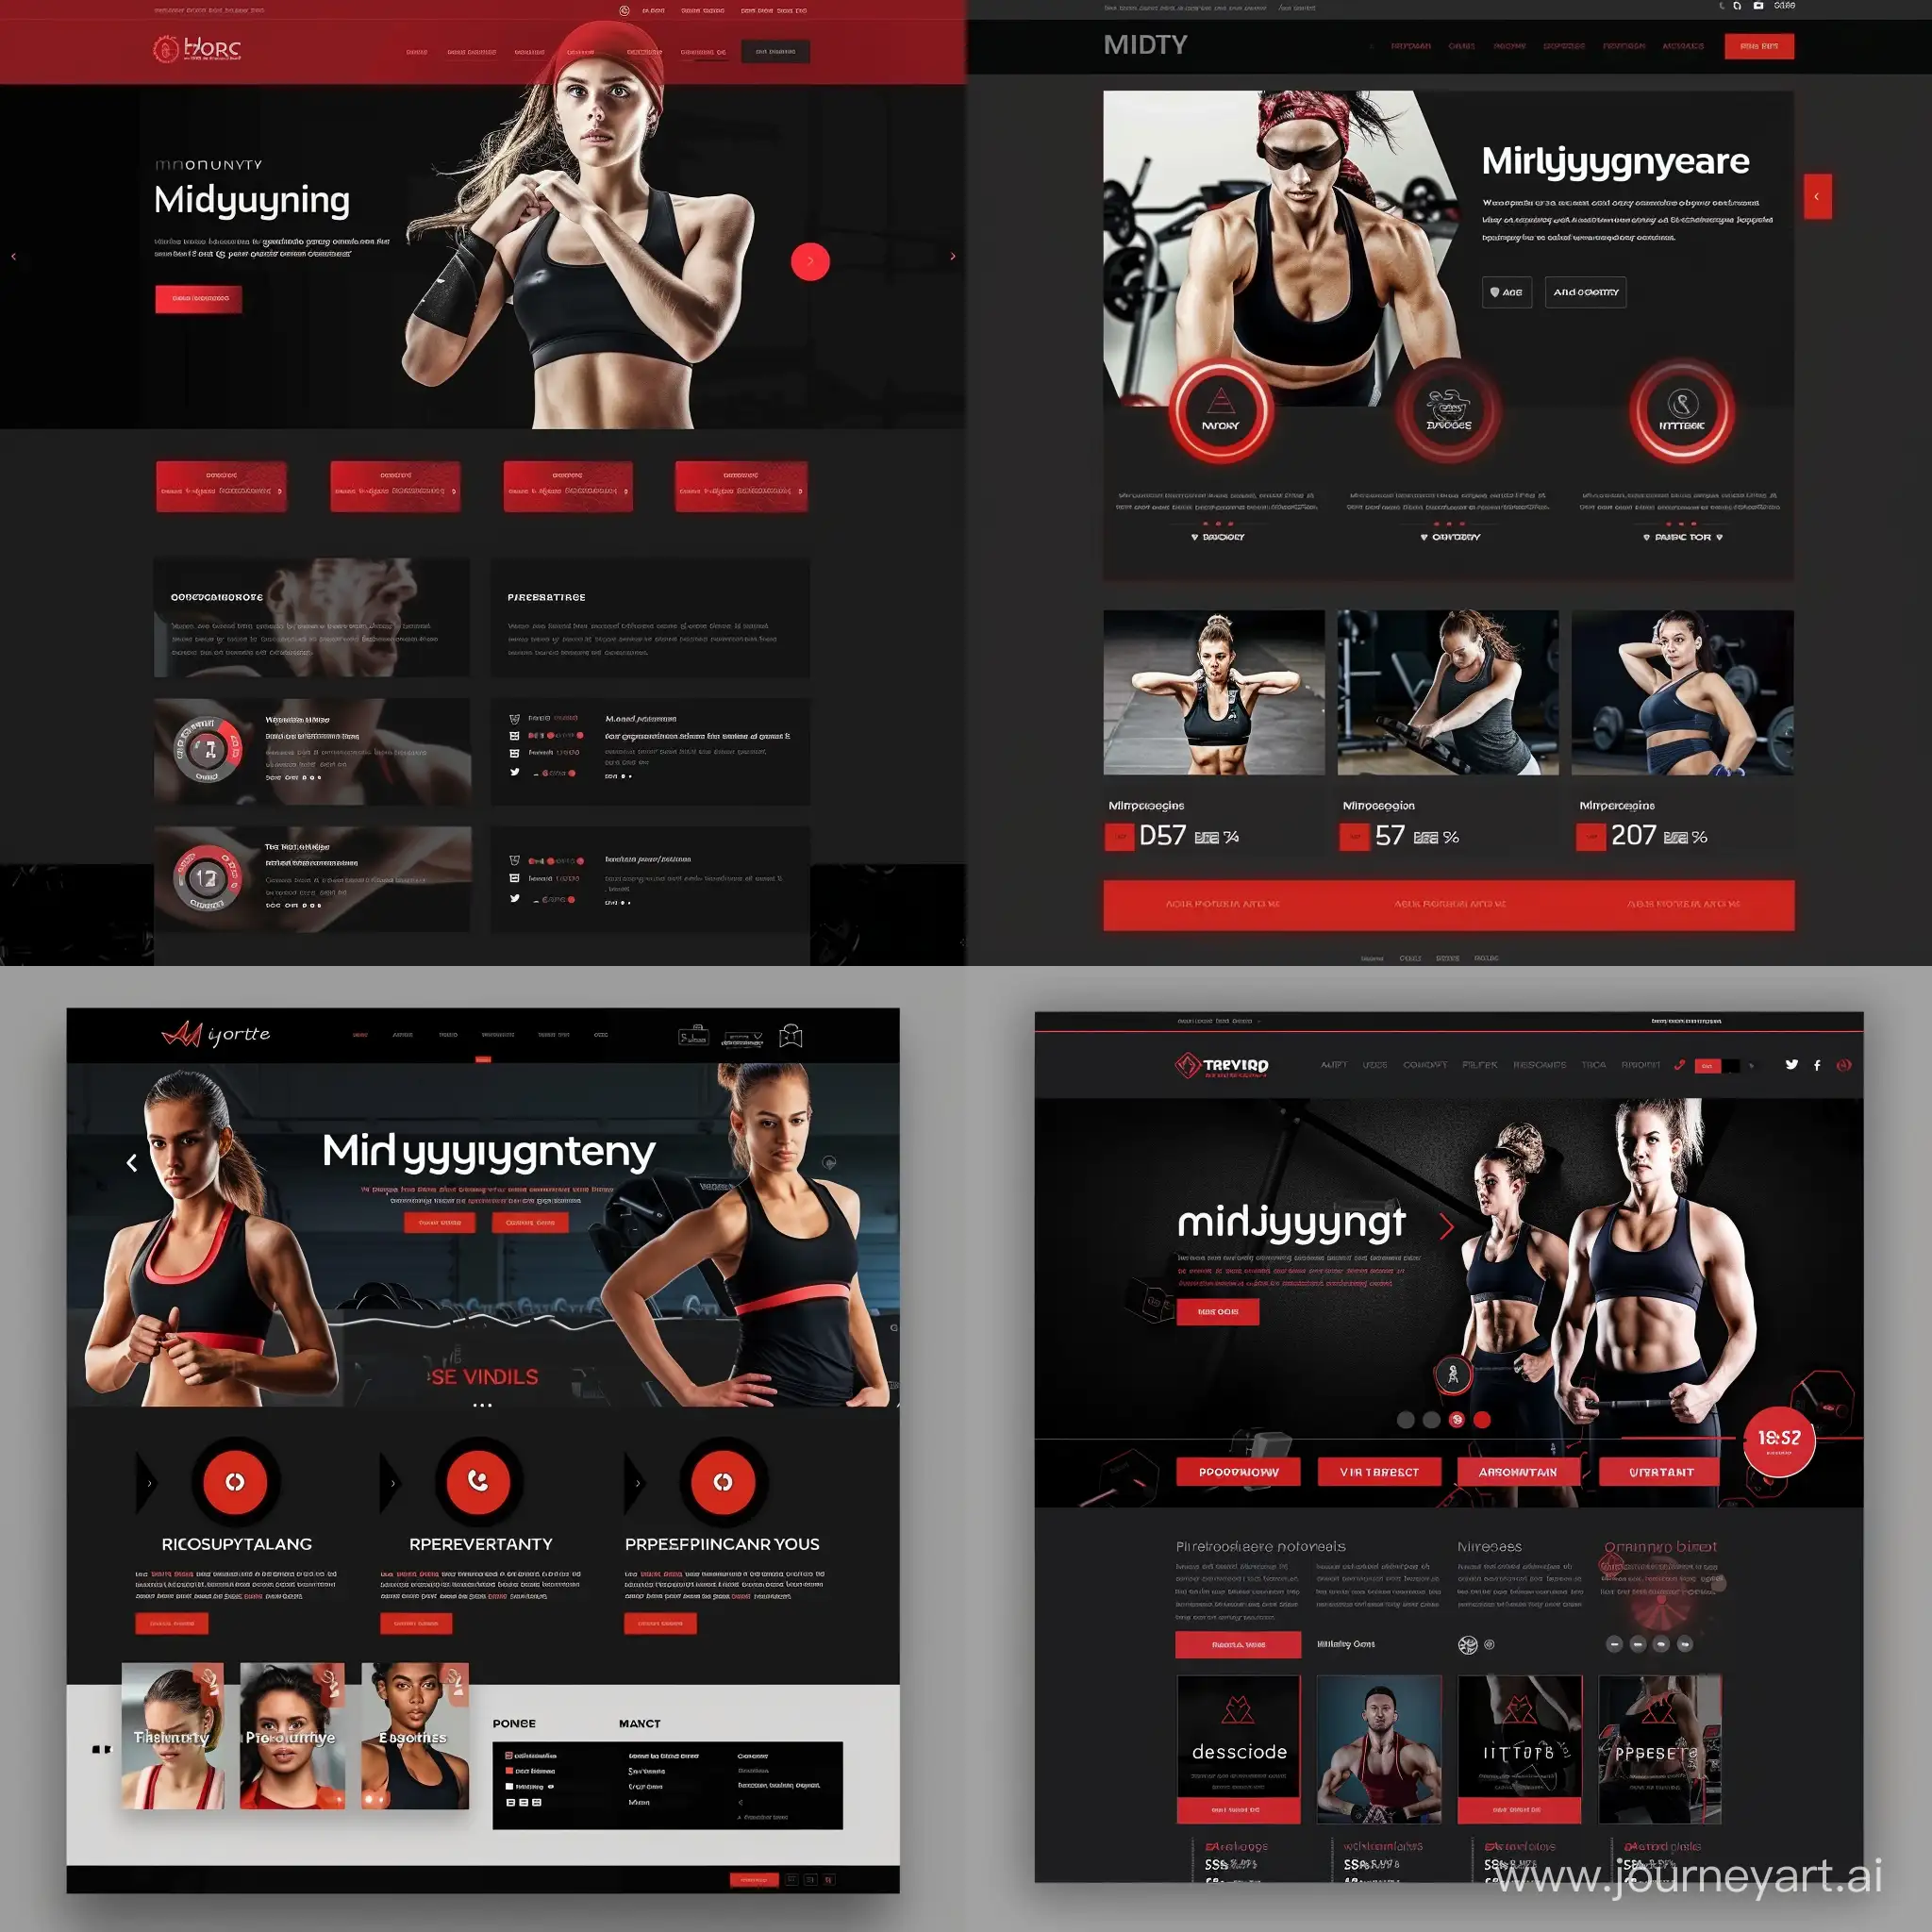 Create a dynamic gym website for the midjourney fitness enthusiast. With a sleek black background symbolizing resilience, accentuate with red buttons for vitality. Showcase progress imagery and member testimonials. Offer easy navigation to personalized plans, progress tracking, nutrition, and community support. Empower users to persevere and thrive with a streamlined and motivational interface